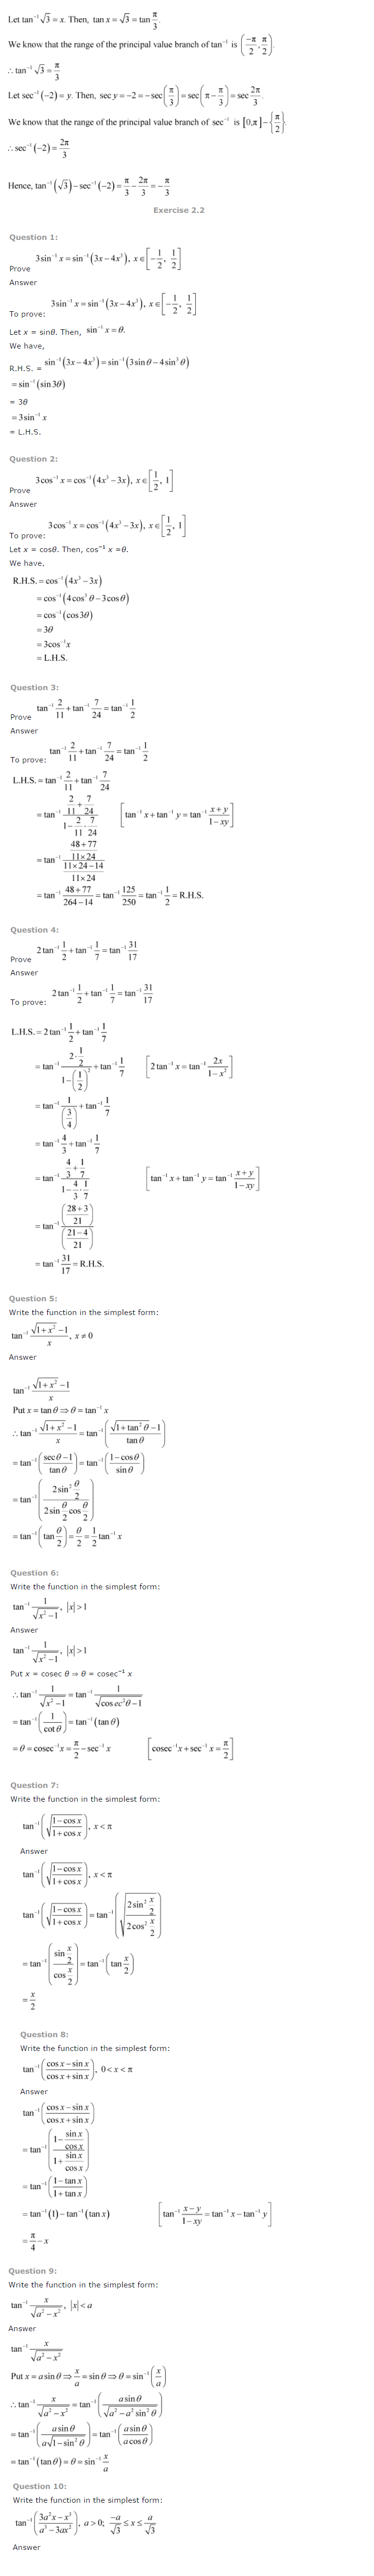 NCERT Solutions For Class 12 Maths Chapter 2 Inverse Trigonometric Functions 2